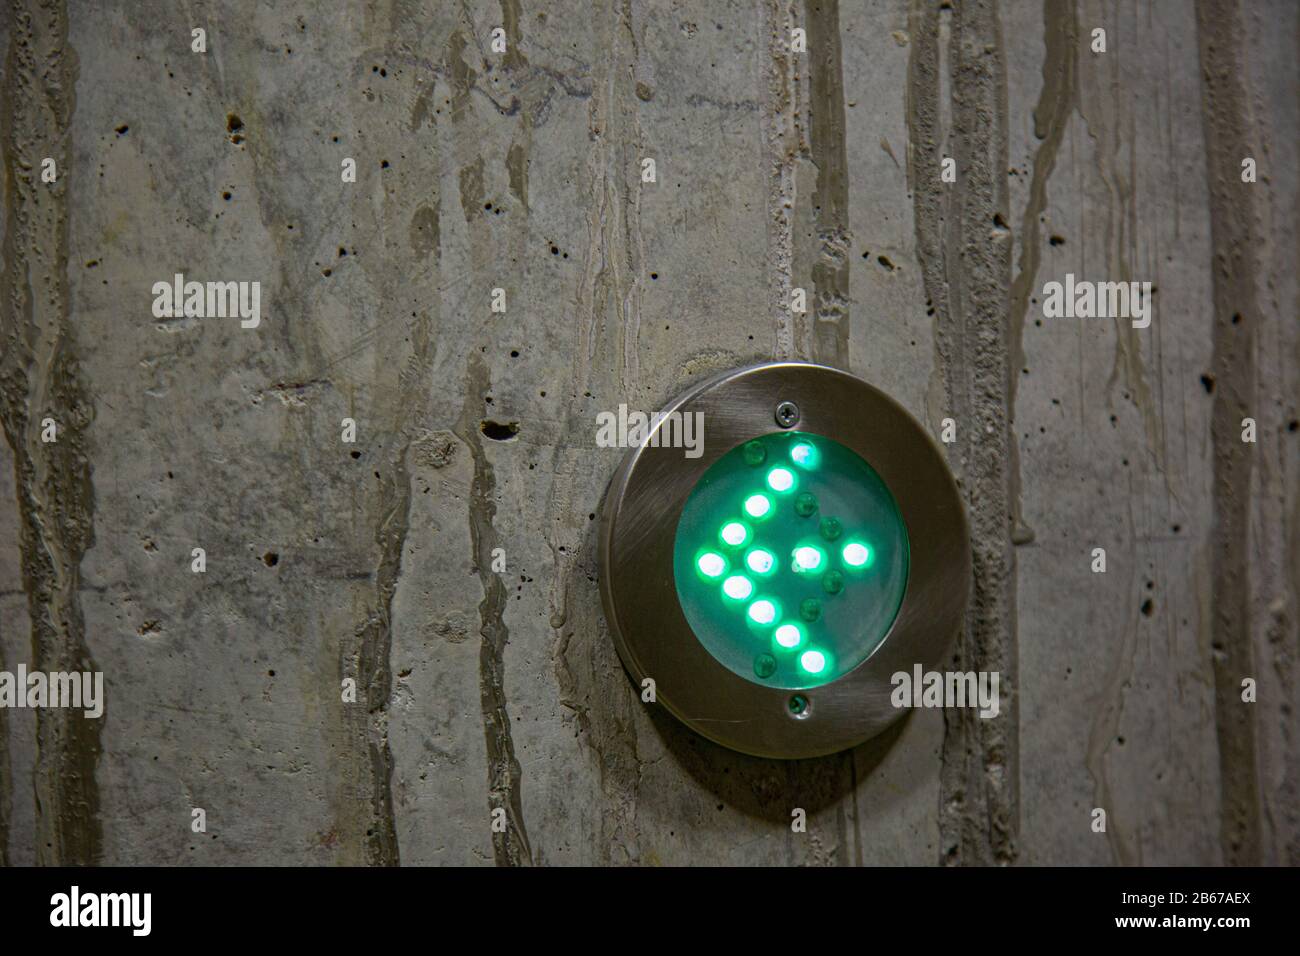 green arrow as directional sign in LED lights in a metal ring on a concrete wall Stock Photo